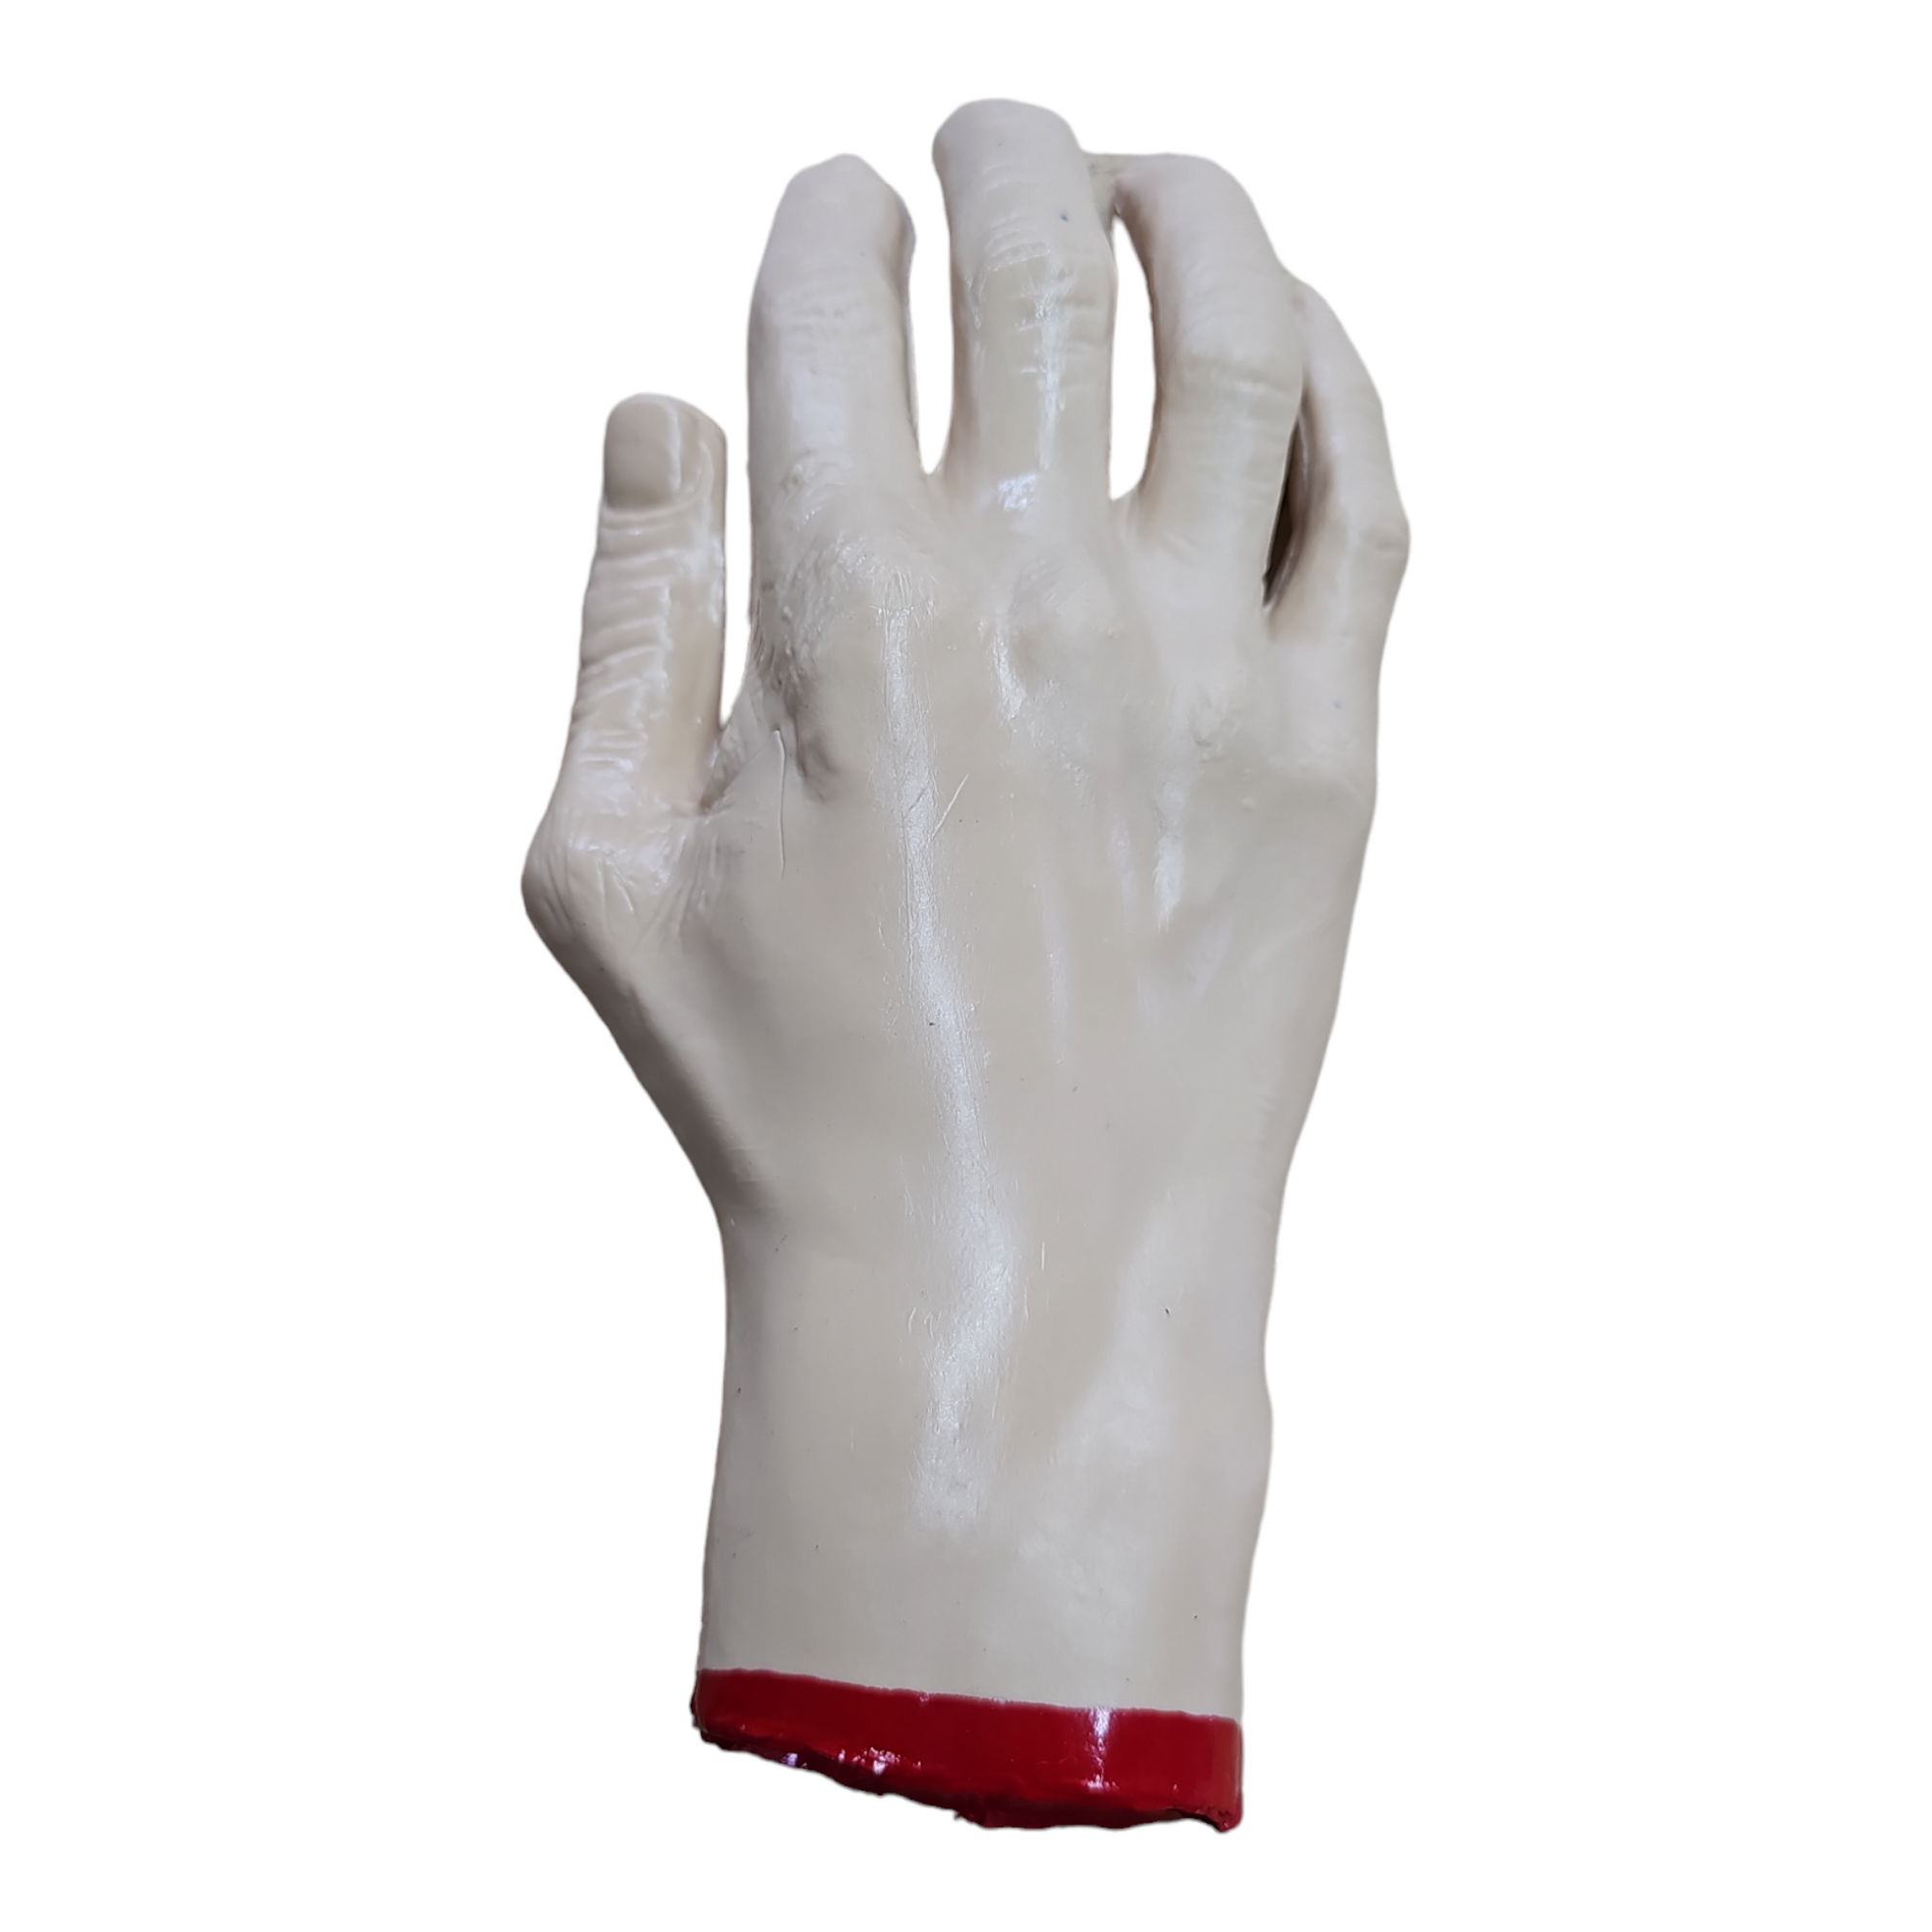 Haunted Hand Life Sized Prop